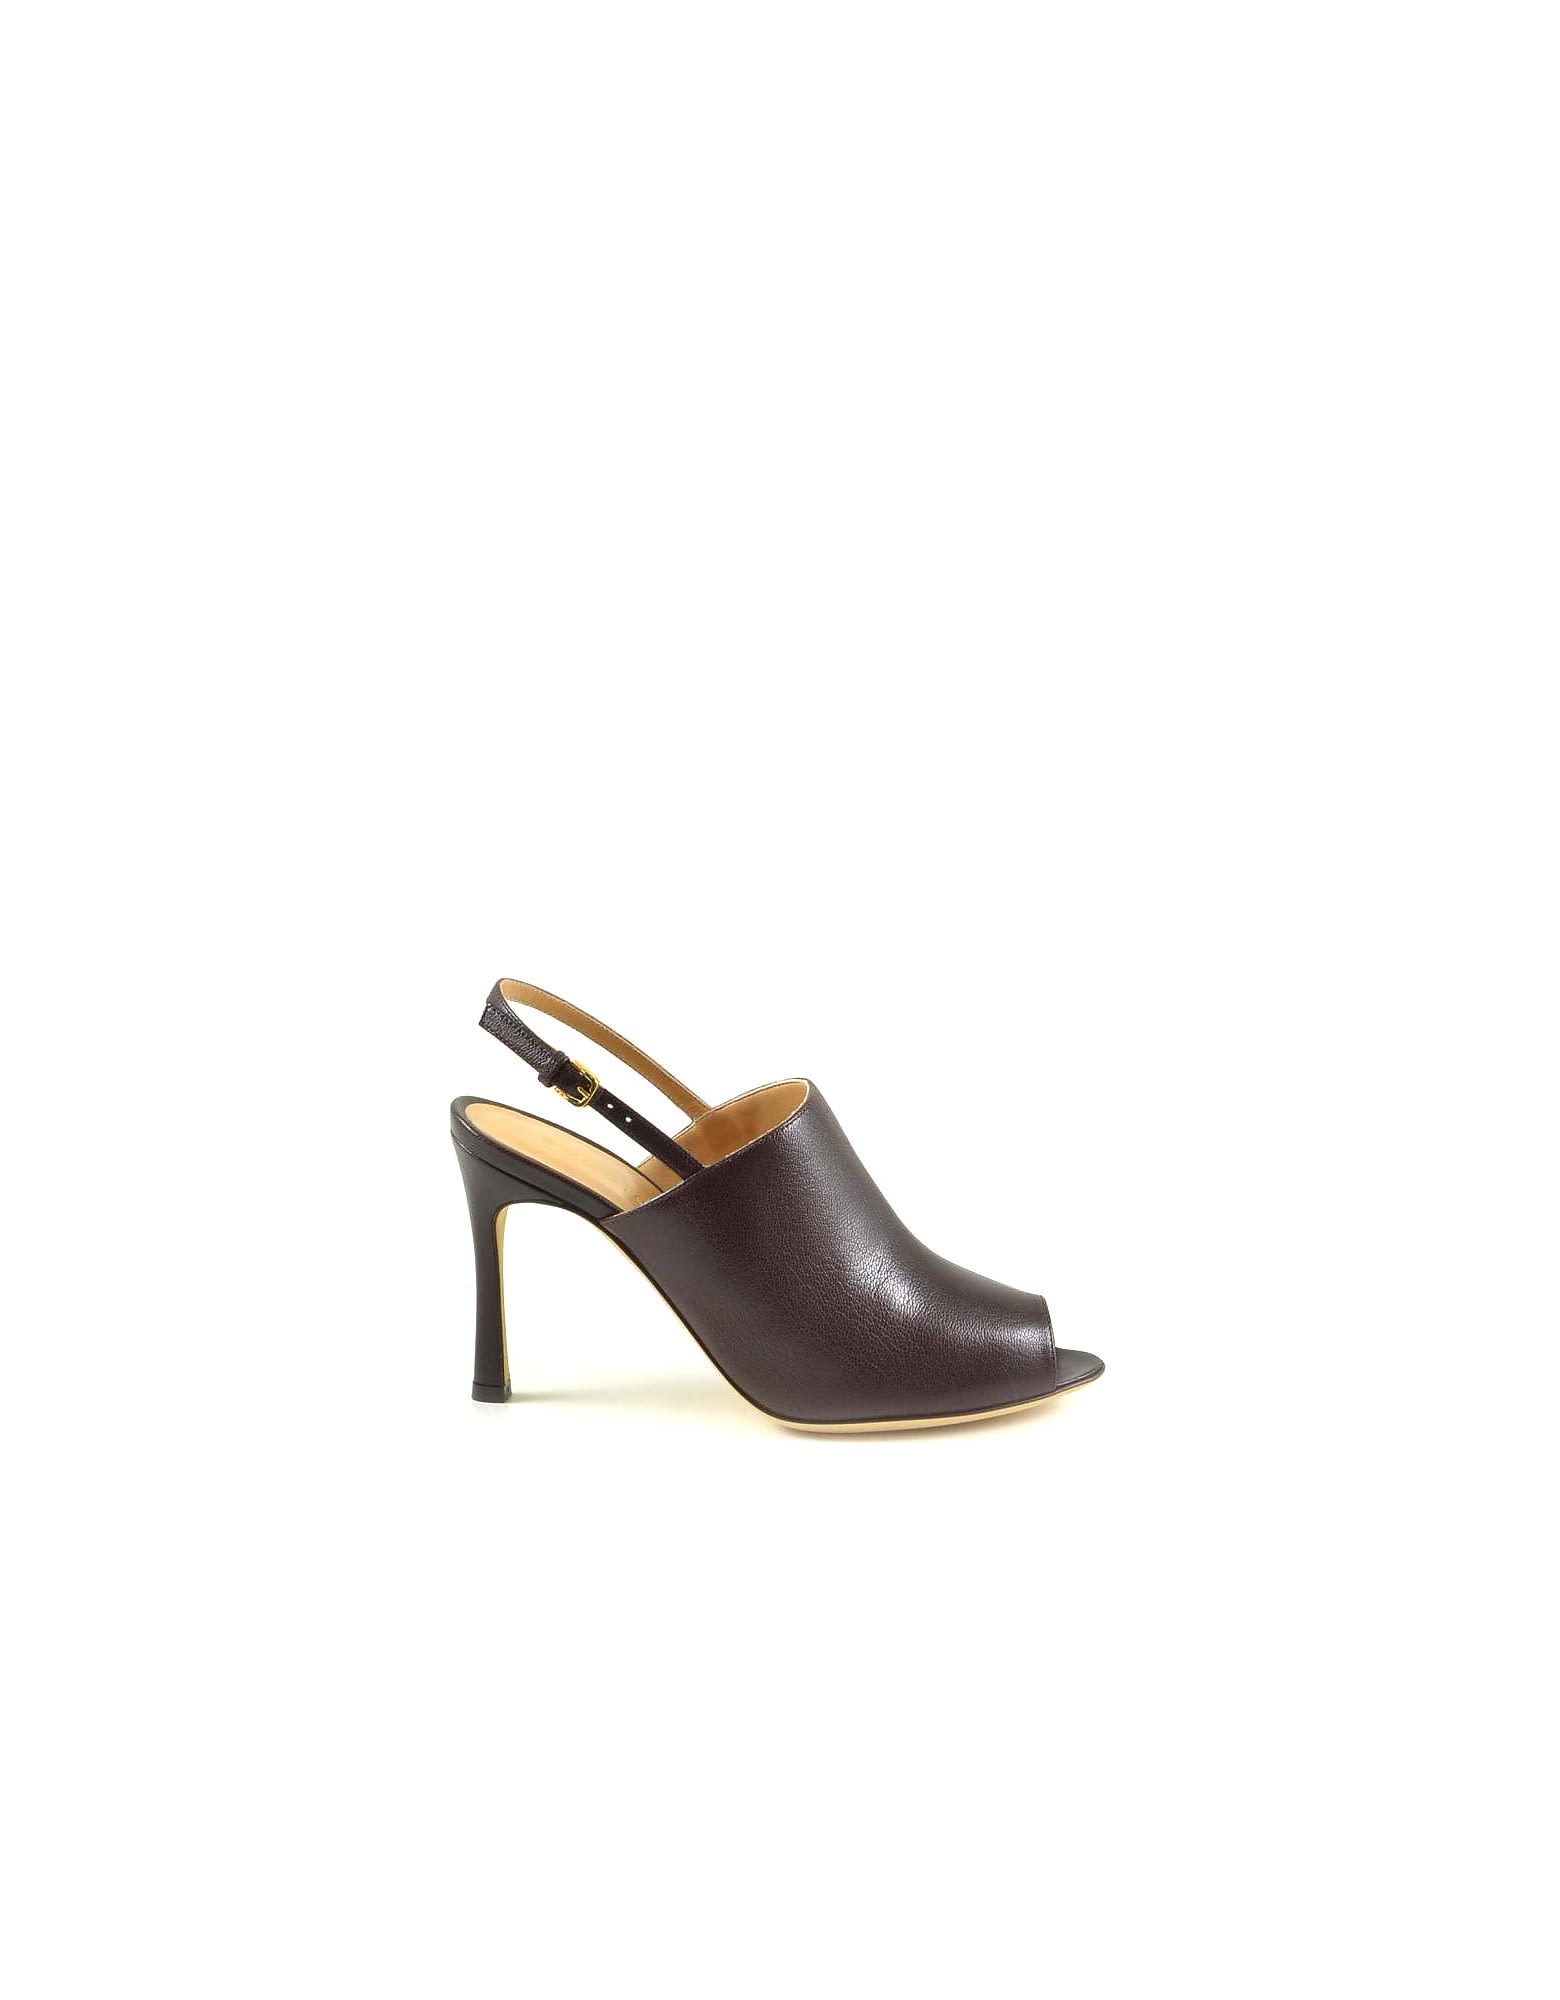 Buy Sergio Rossi Dark Brown Leather Slingback Mules online, shop Sergio Rossi shoes with free shipping